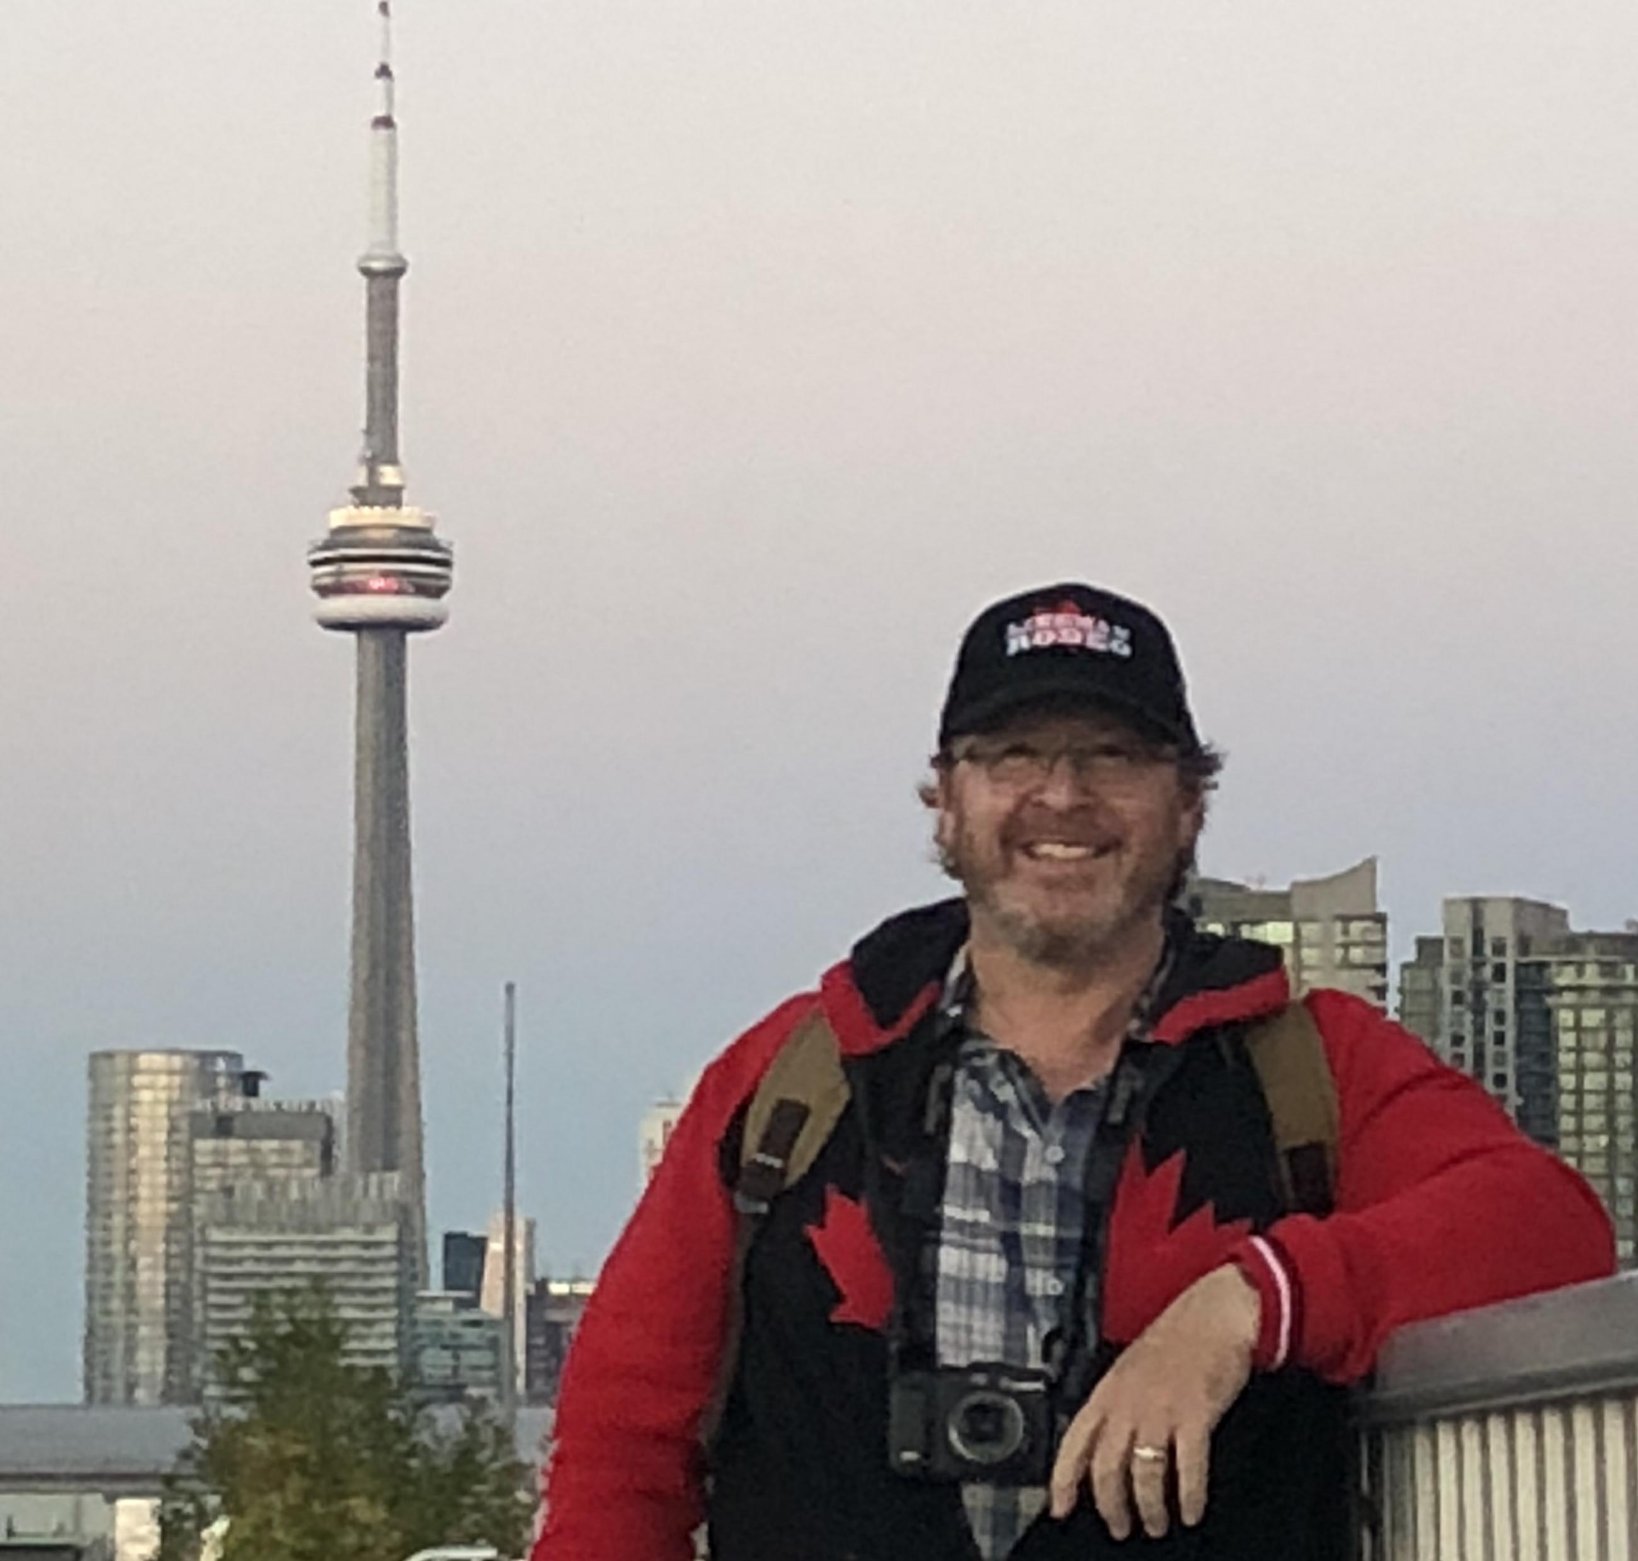 Growing multi-media giant, photographer and #torontoblogger covering sports, entertainment and life in the big city. I am the Toronto Grand Prix Tourist.